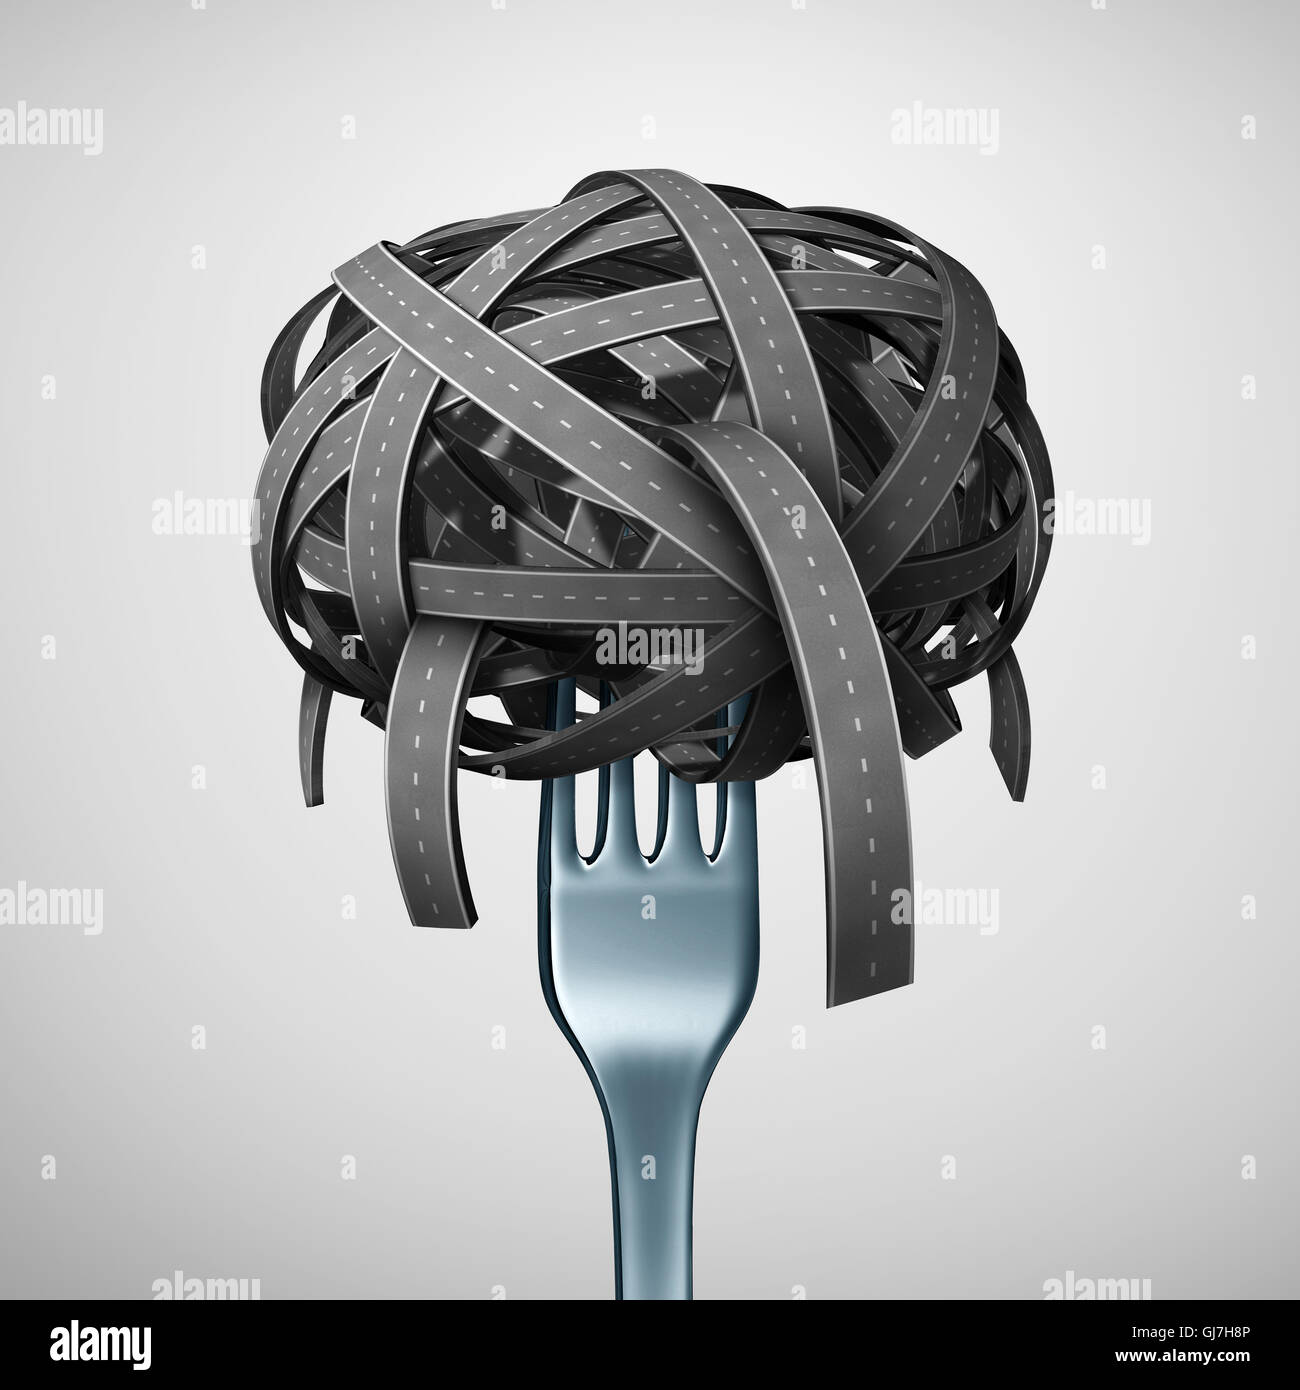 Food Transport or eating on the road concept as a fork inside a pile of twisted streets and highways shaped as pasta or spaghetti as a transportation symbol for shipping or delivering a meal as a 3D illustration. Stock Photo